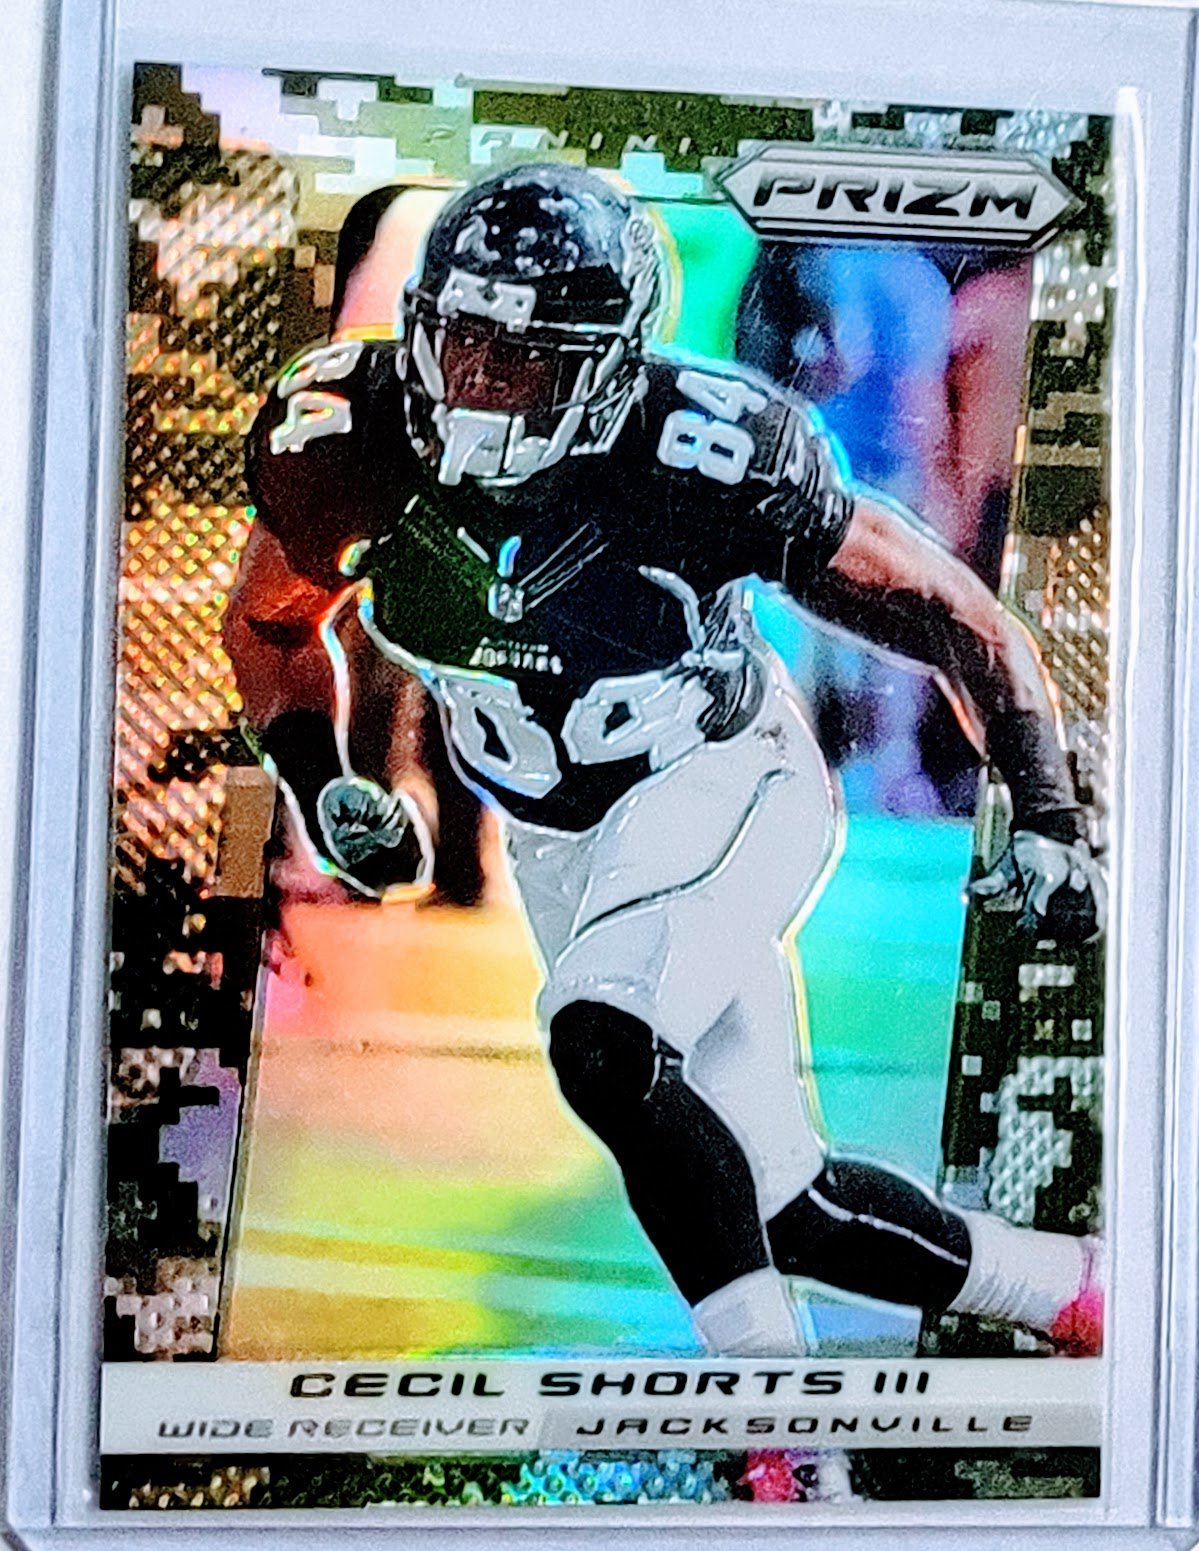 2013 Panini Prizm Cecil Shorts III Camo Refractor Football Card TPTV simple Xclusive Collectibles   